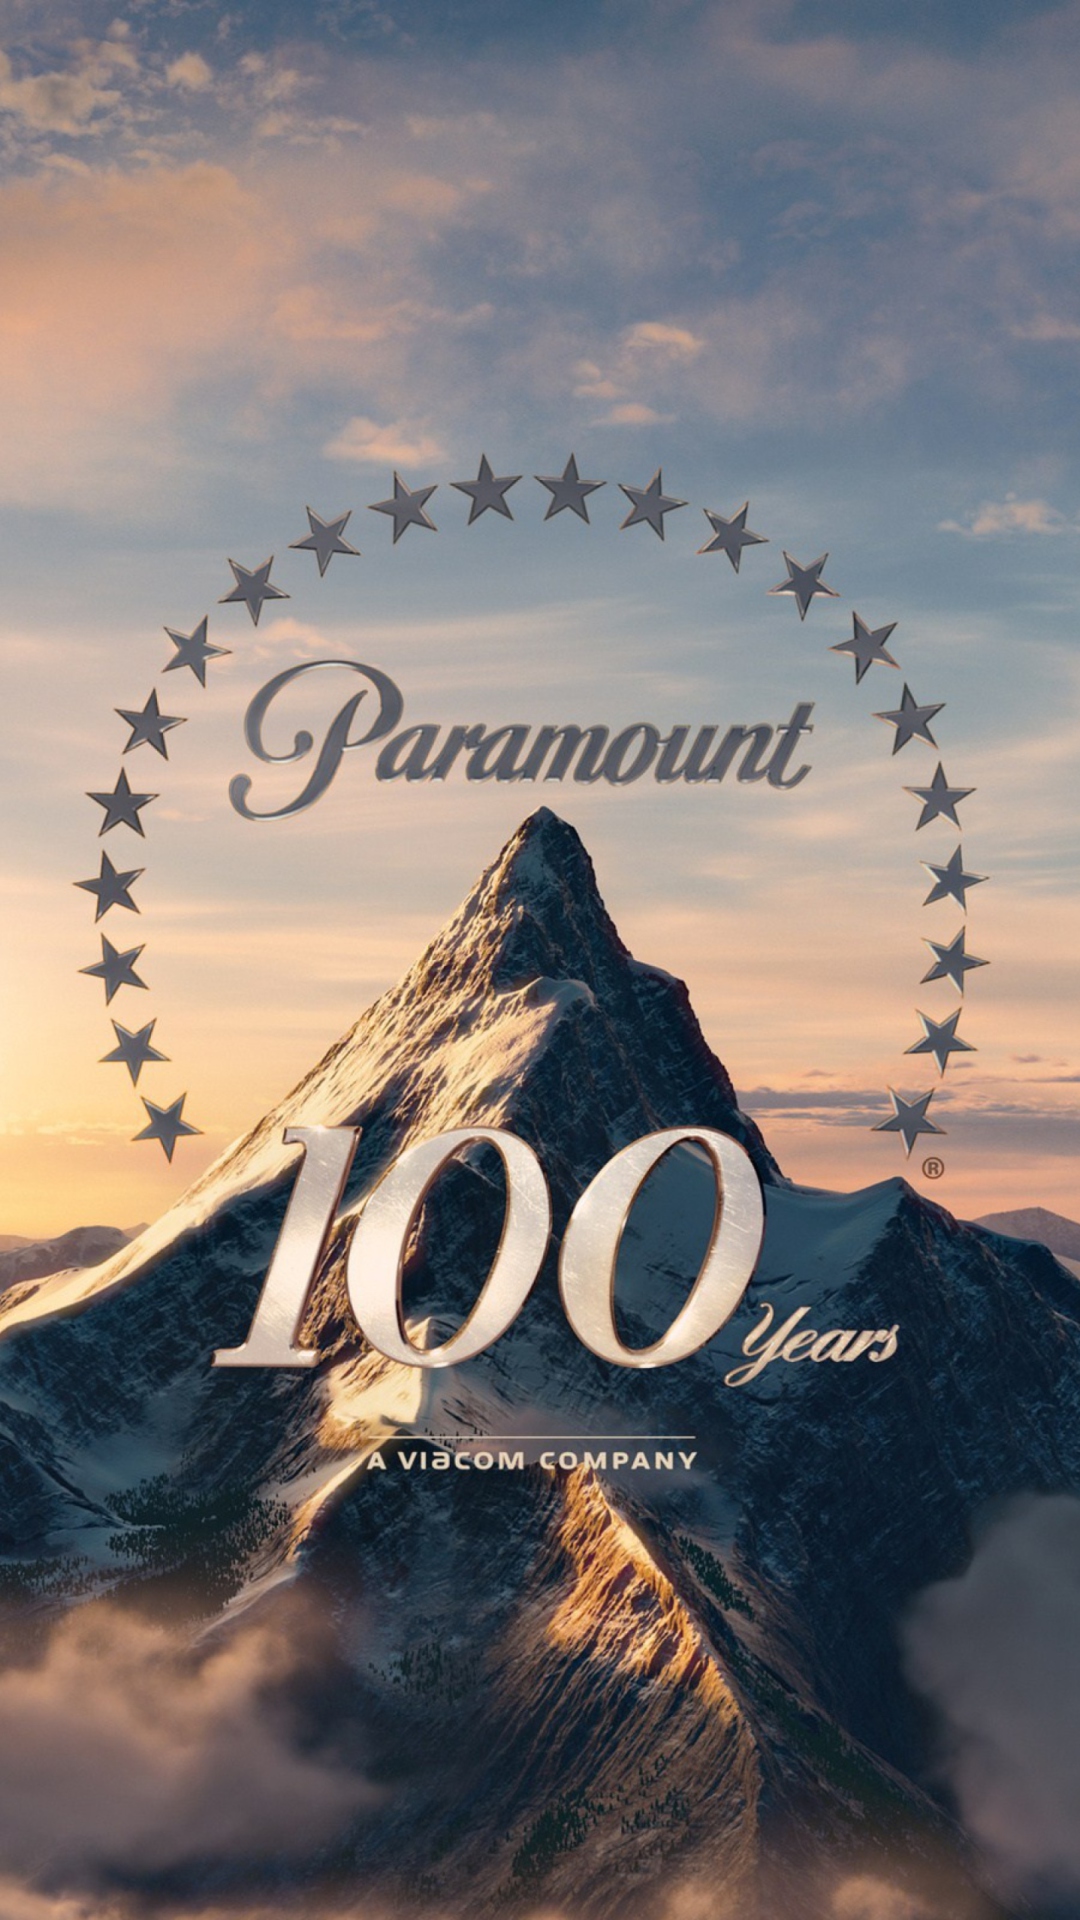 Paramount Pictures 100 Years wallpaper 1080x1920